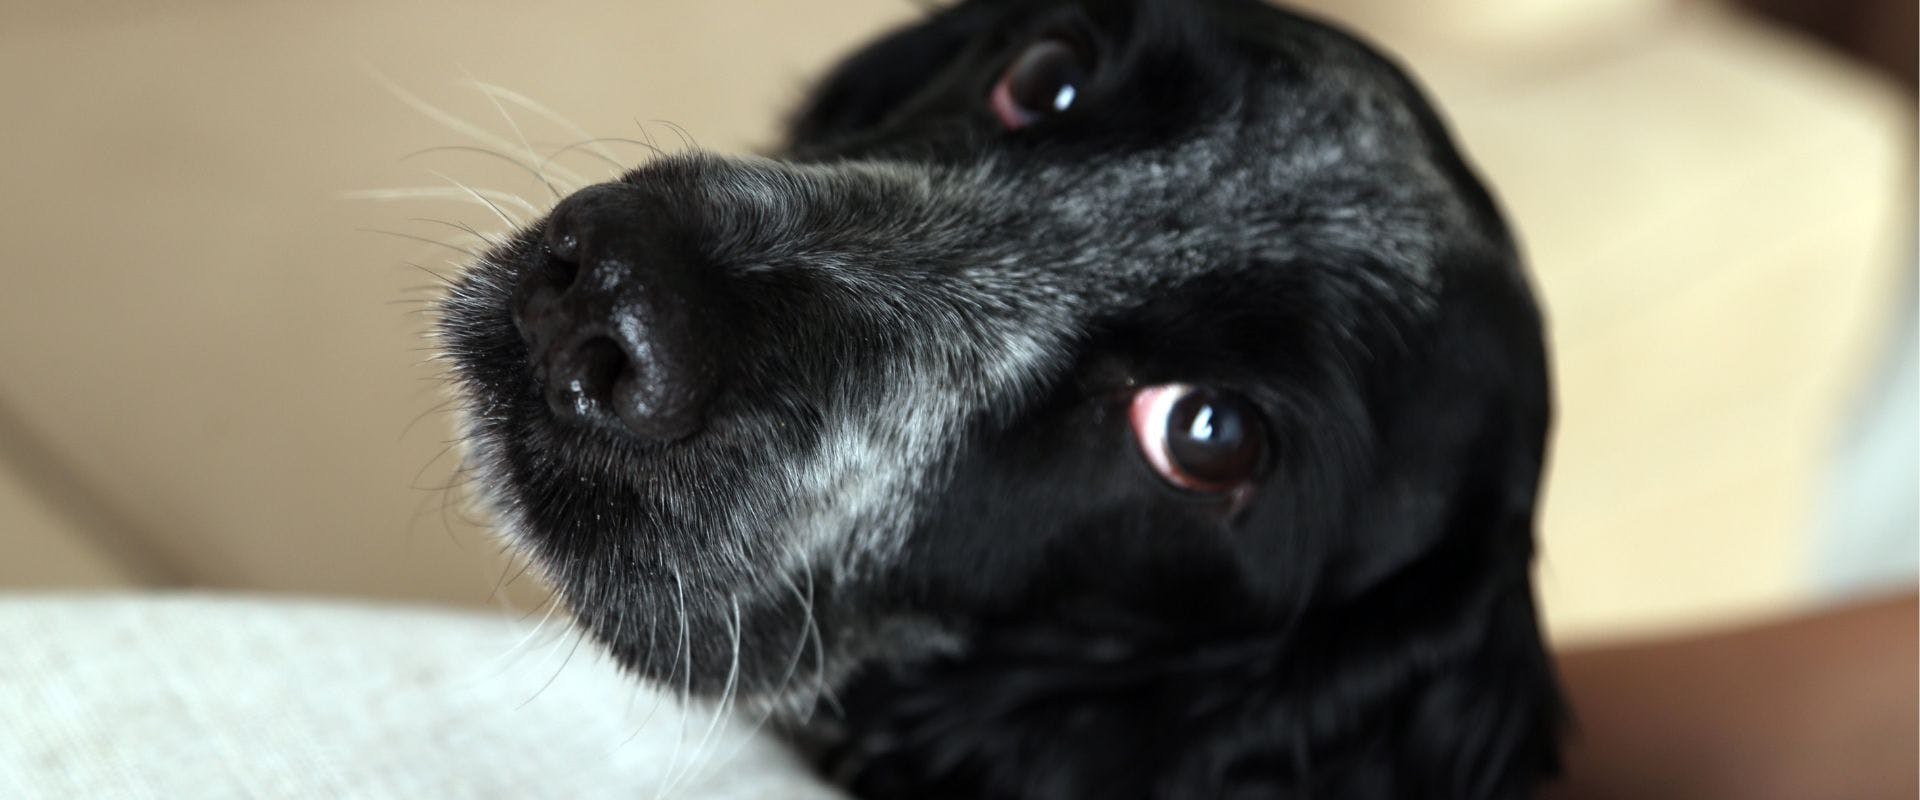 Close up of a black and white dog